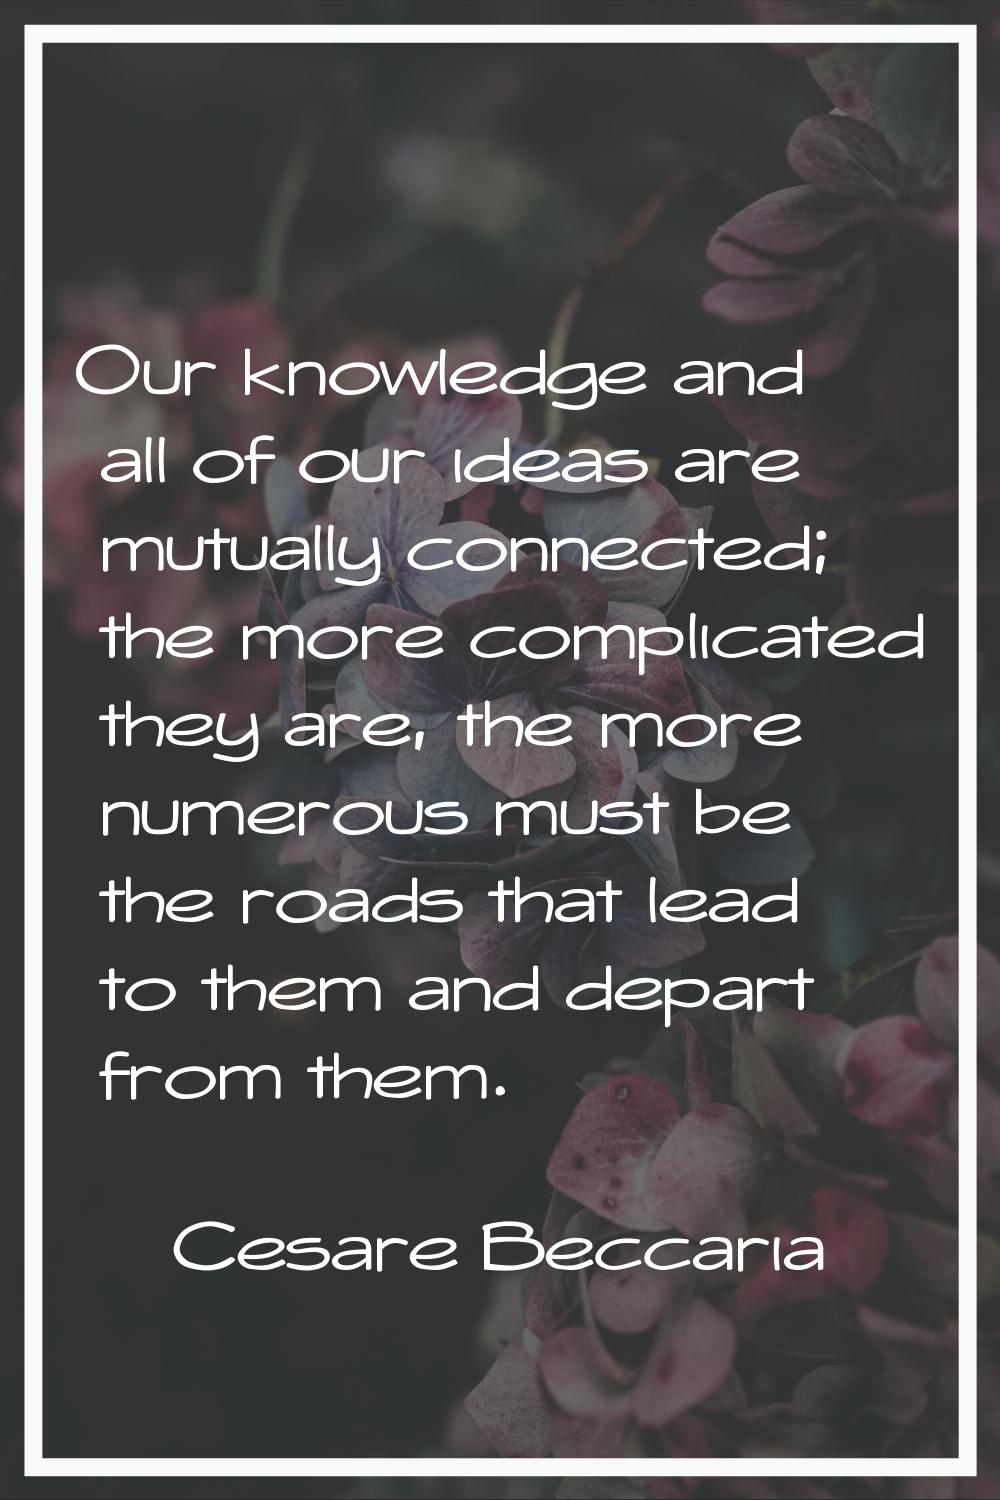 Our knowledge and all of our ideas are mutually connected; the more complicated they are, the more 